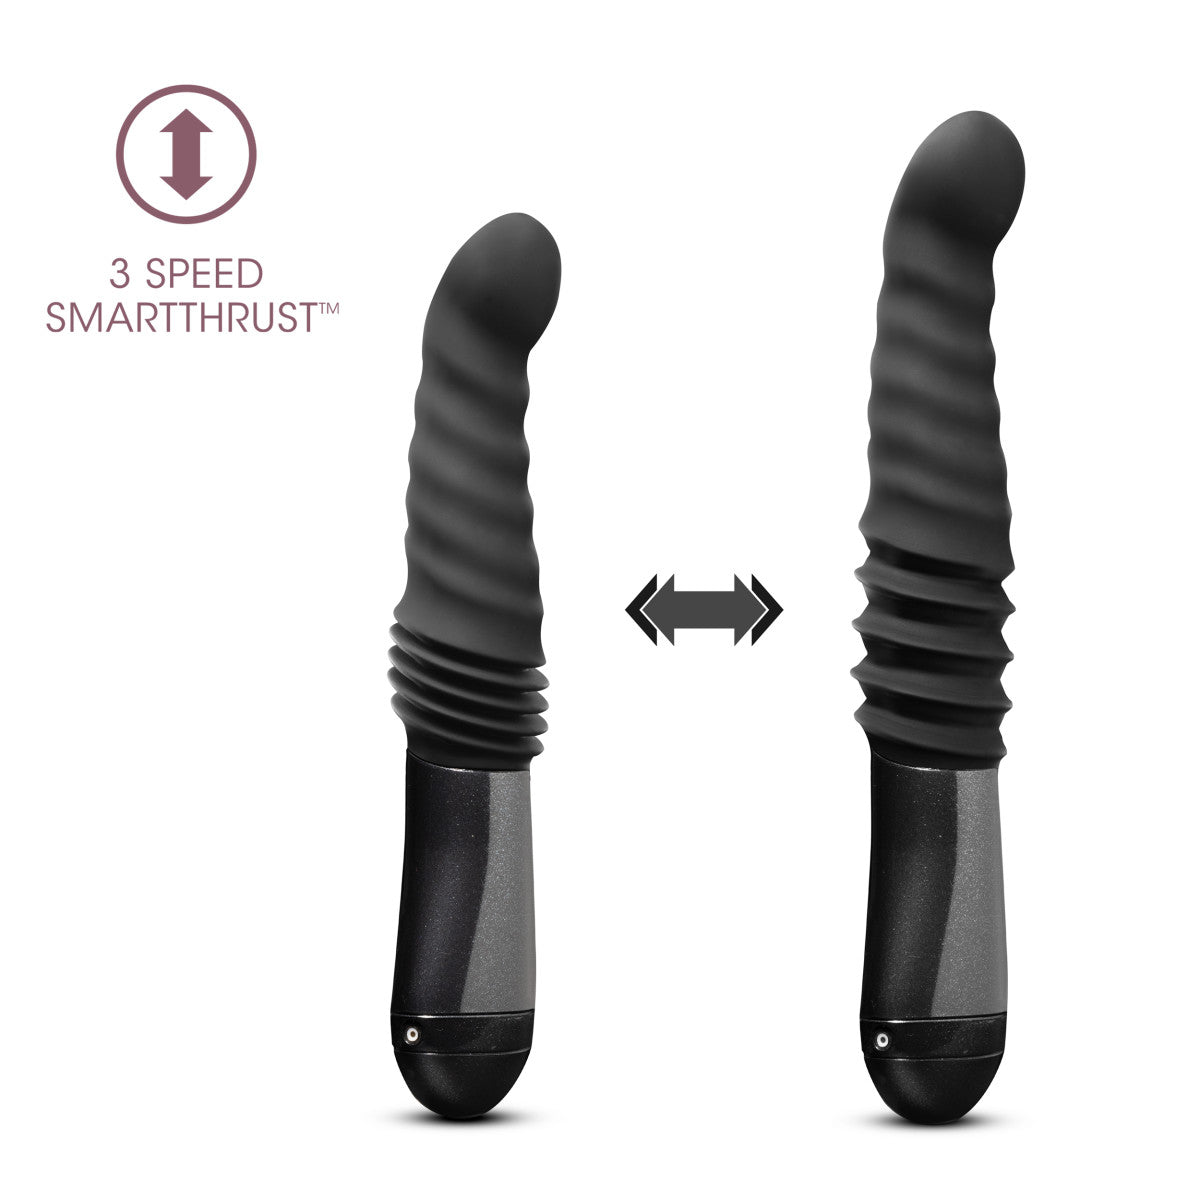 Temptasia Lazarus Curved G-Spot Black 10-Inch Long Rechargeable Thrusting & Vibrating Dildo